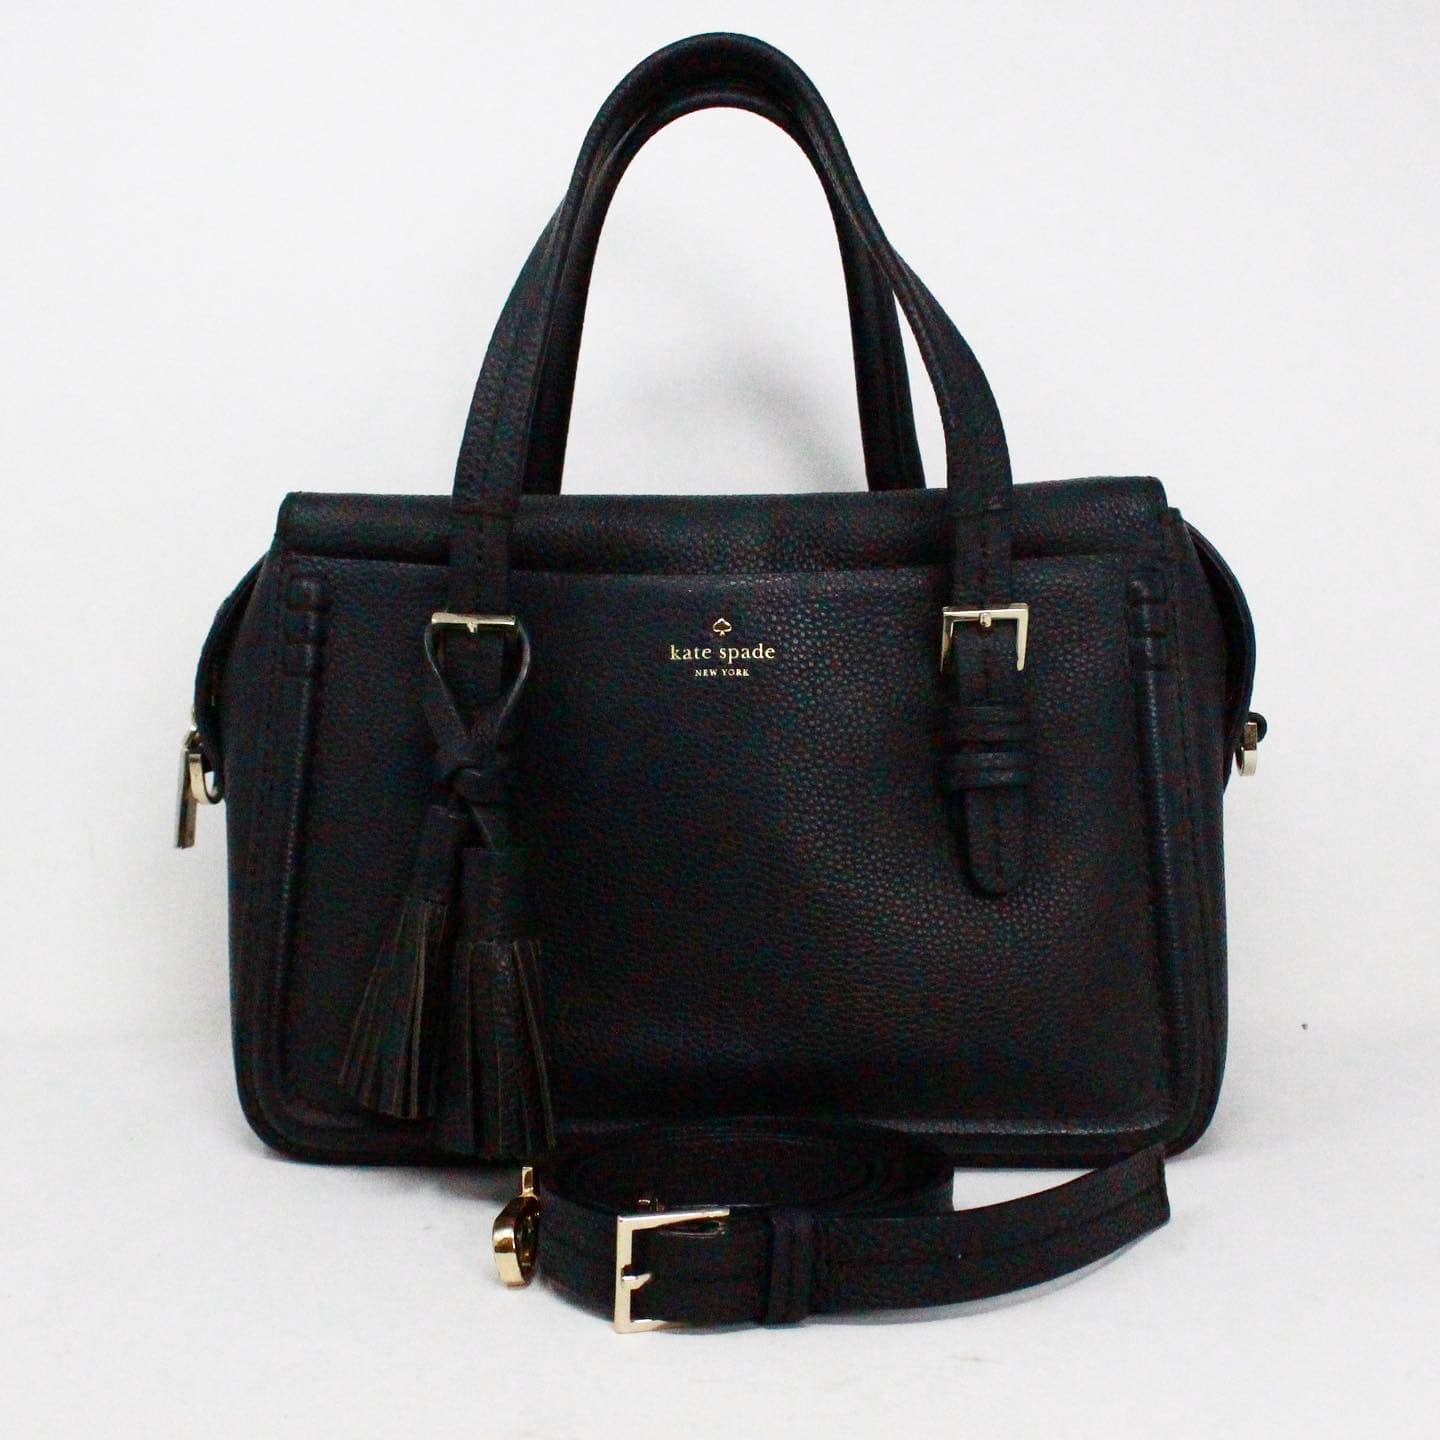 KATE SPADE Black Leather Satchel with Detachable Strap a